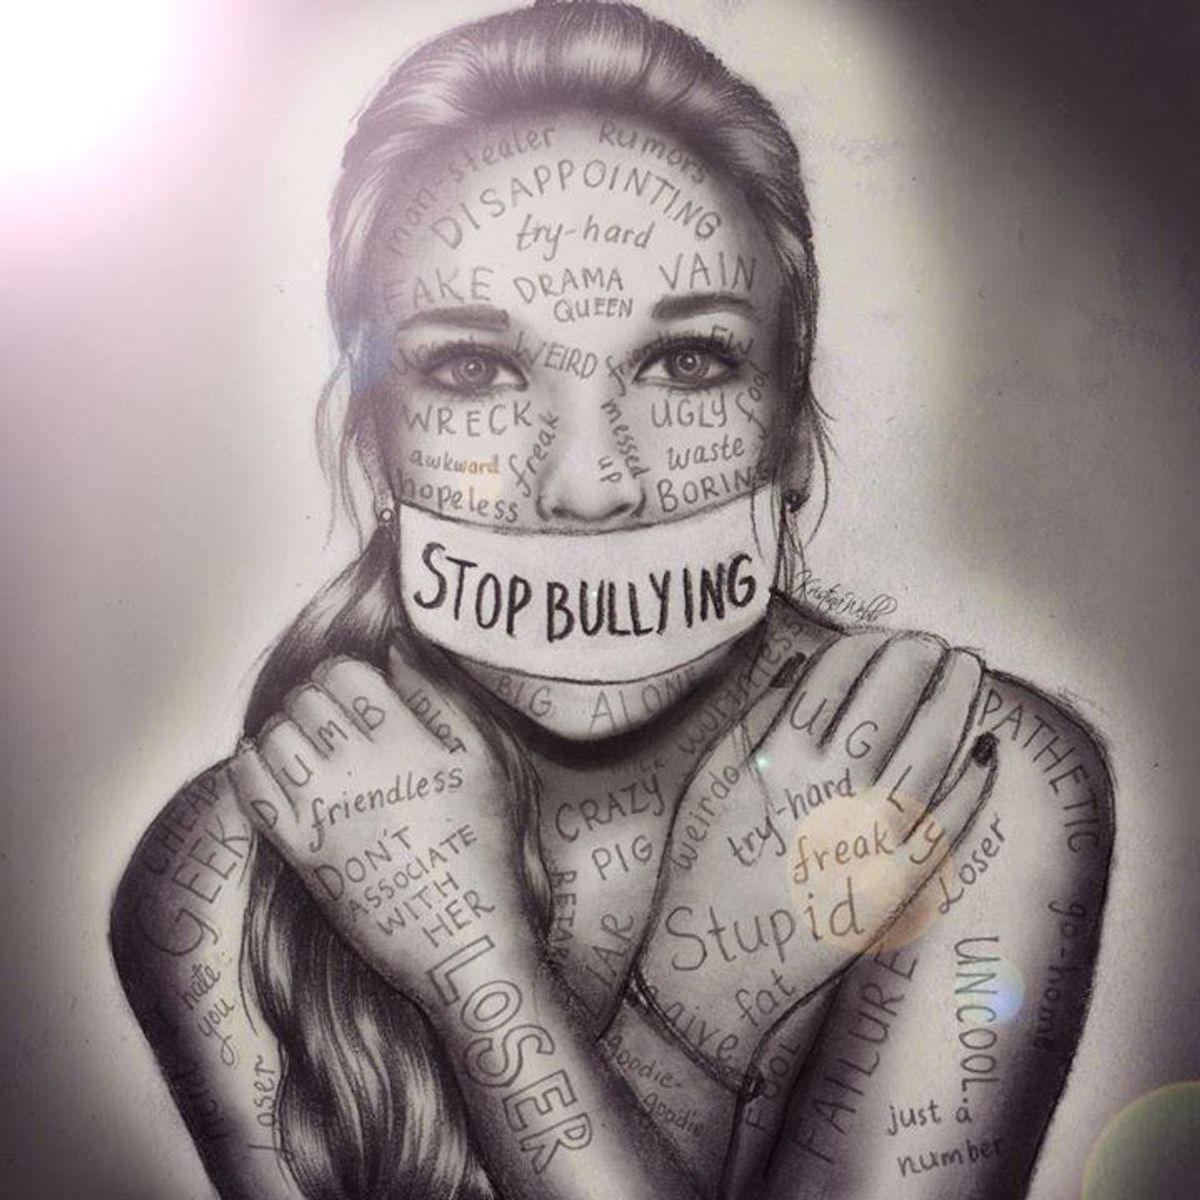 The Day My Bullying Victim Stood Up For Me